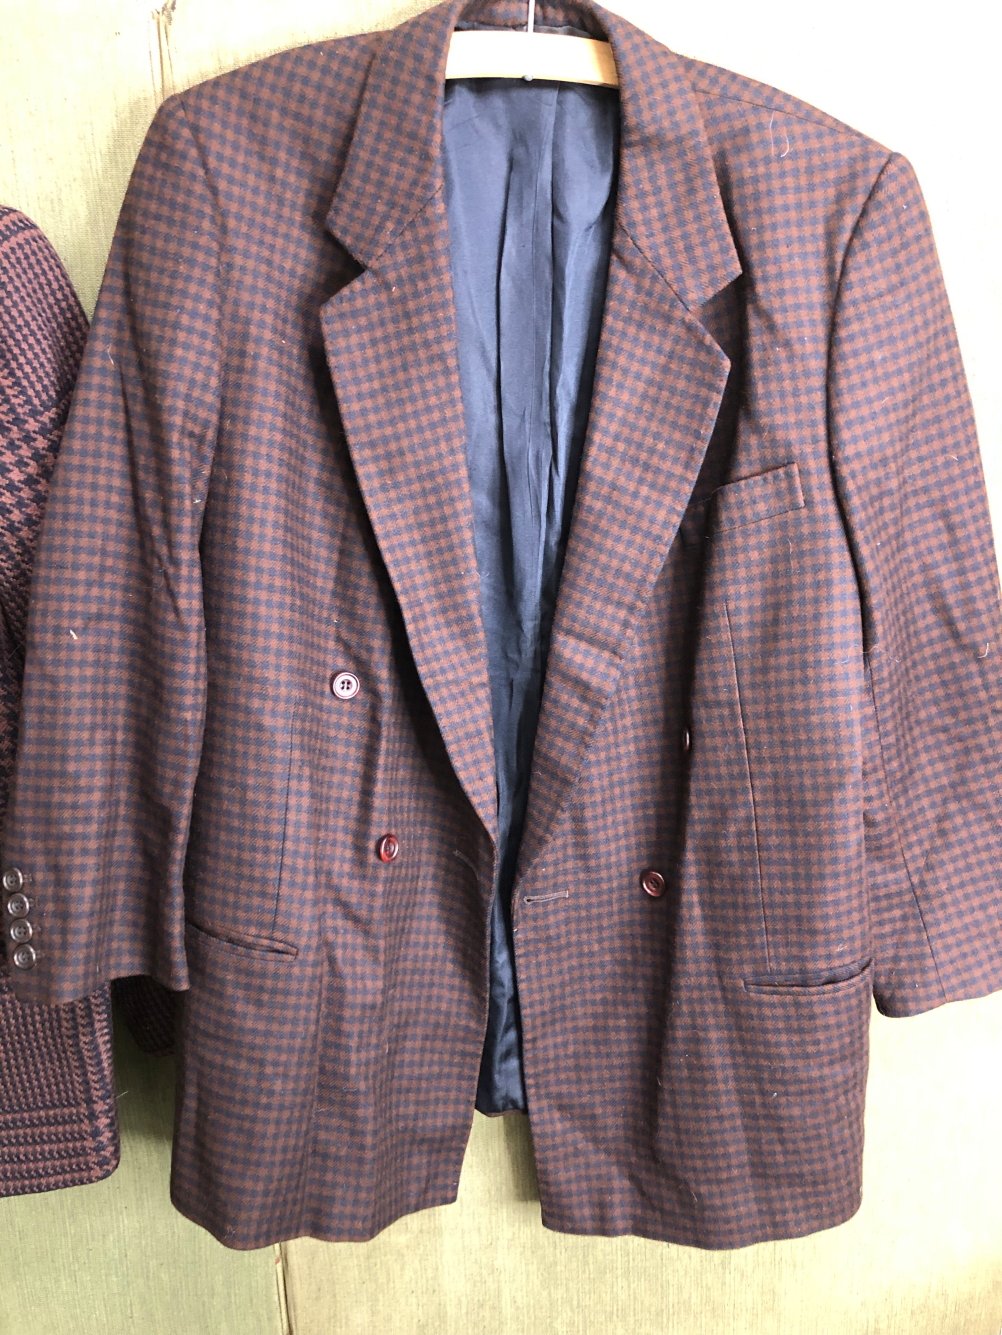 JACKET. HARRY HALL, MADE IN ENGLAND 100% WOOL AND LINED CHECK JACKET PIT TO PIT 43cms, SHOULDER TO - Image 6 of 11